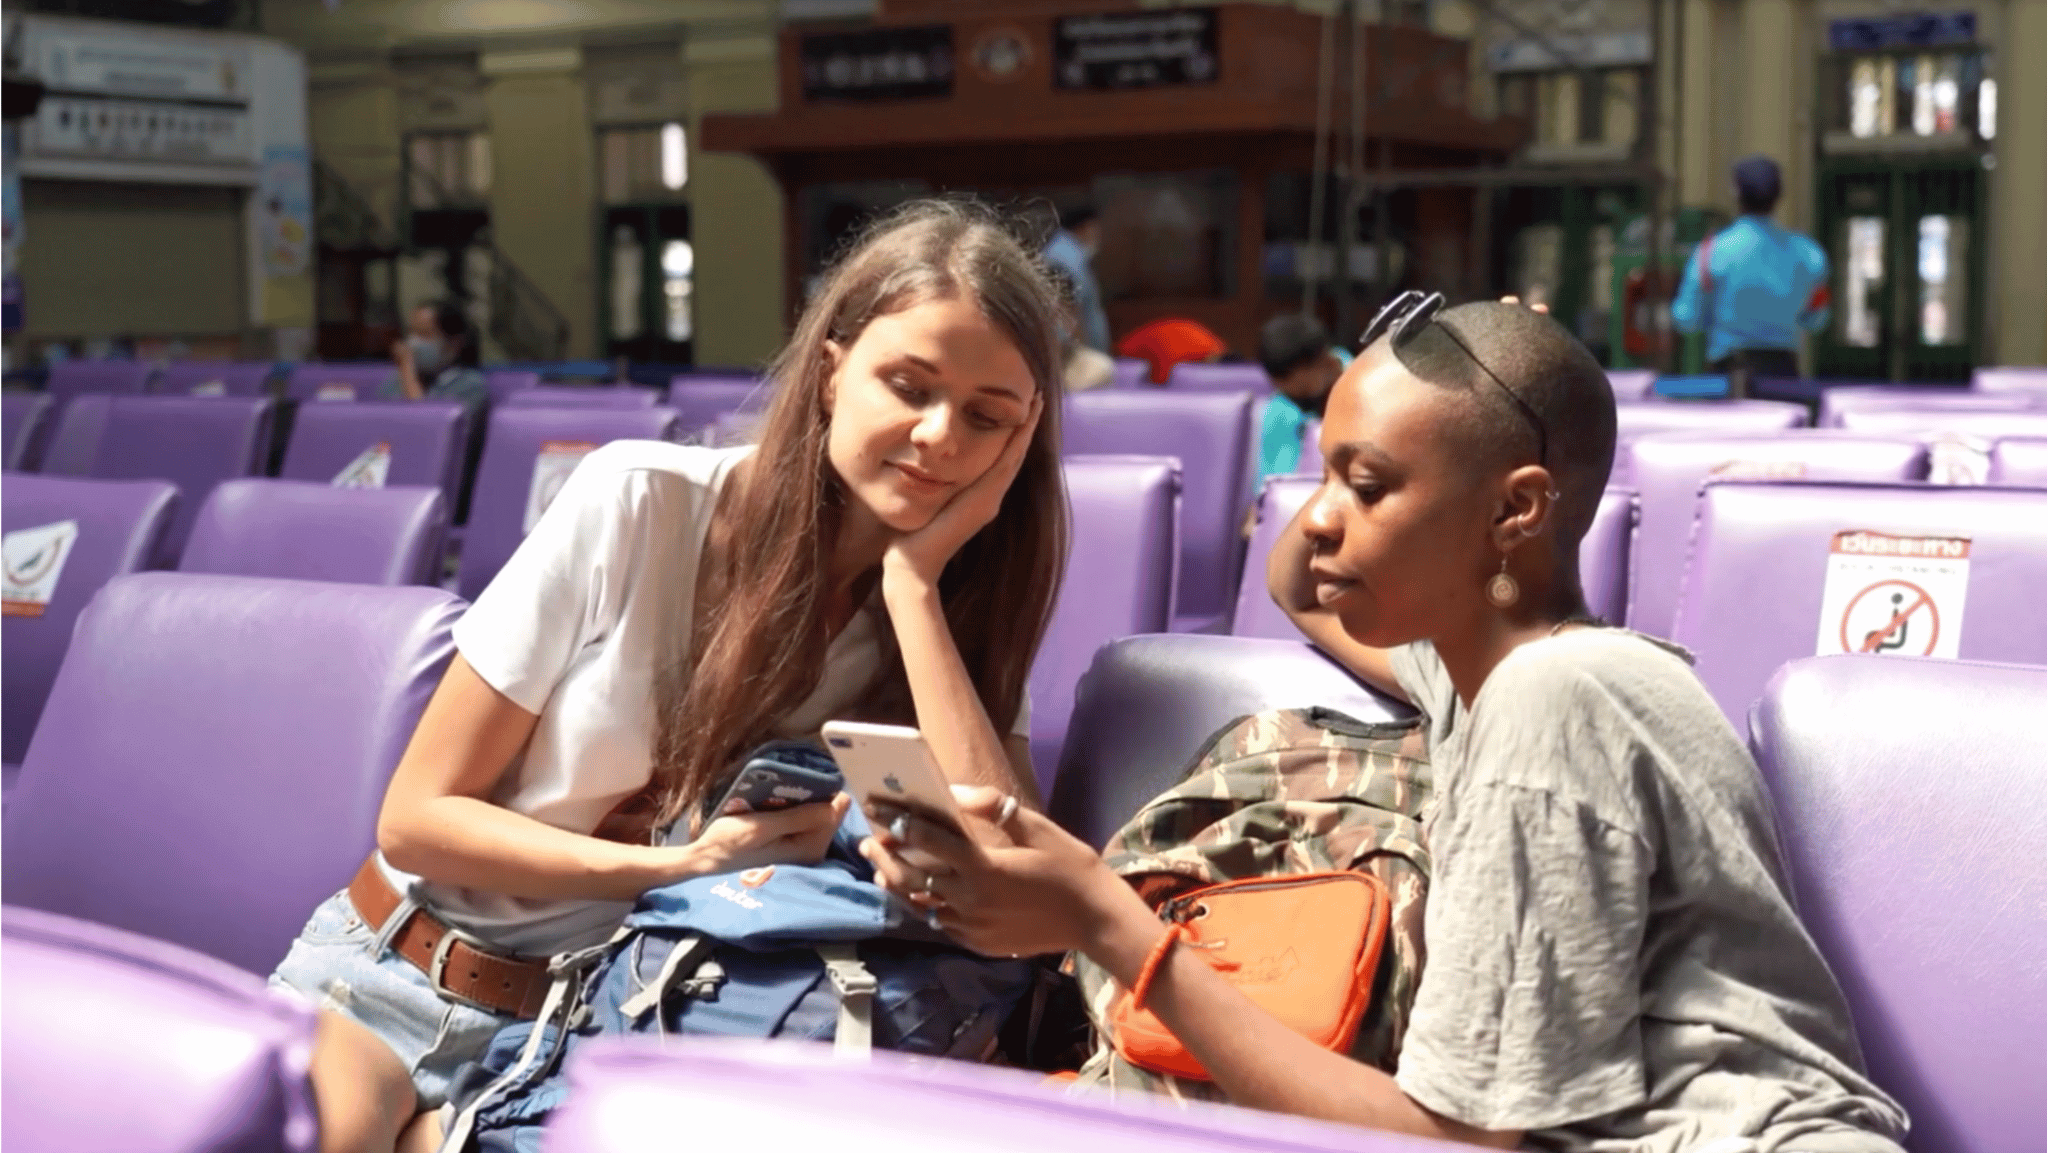 Two travellers looking at a phone in a train station